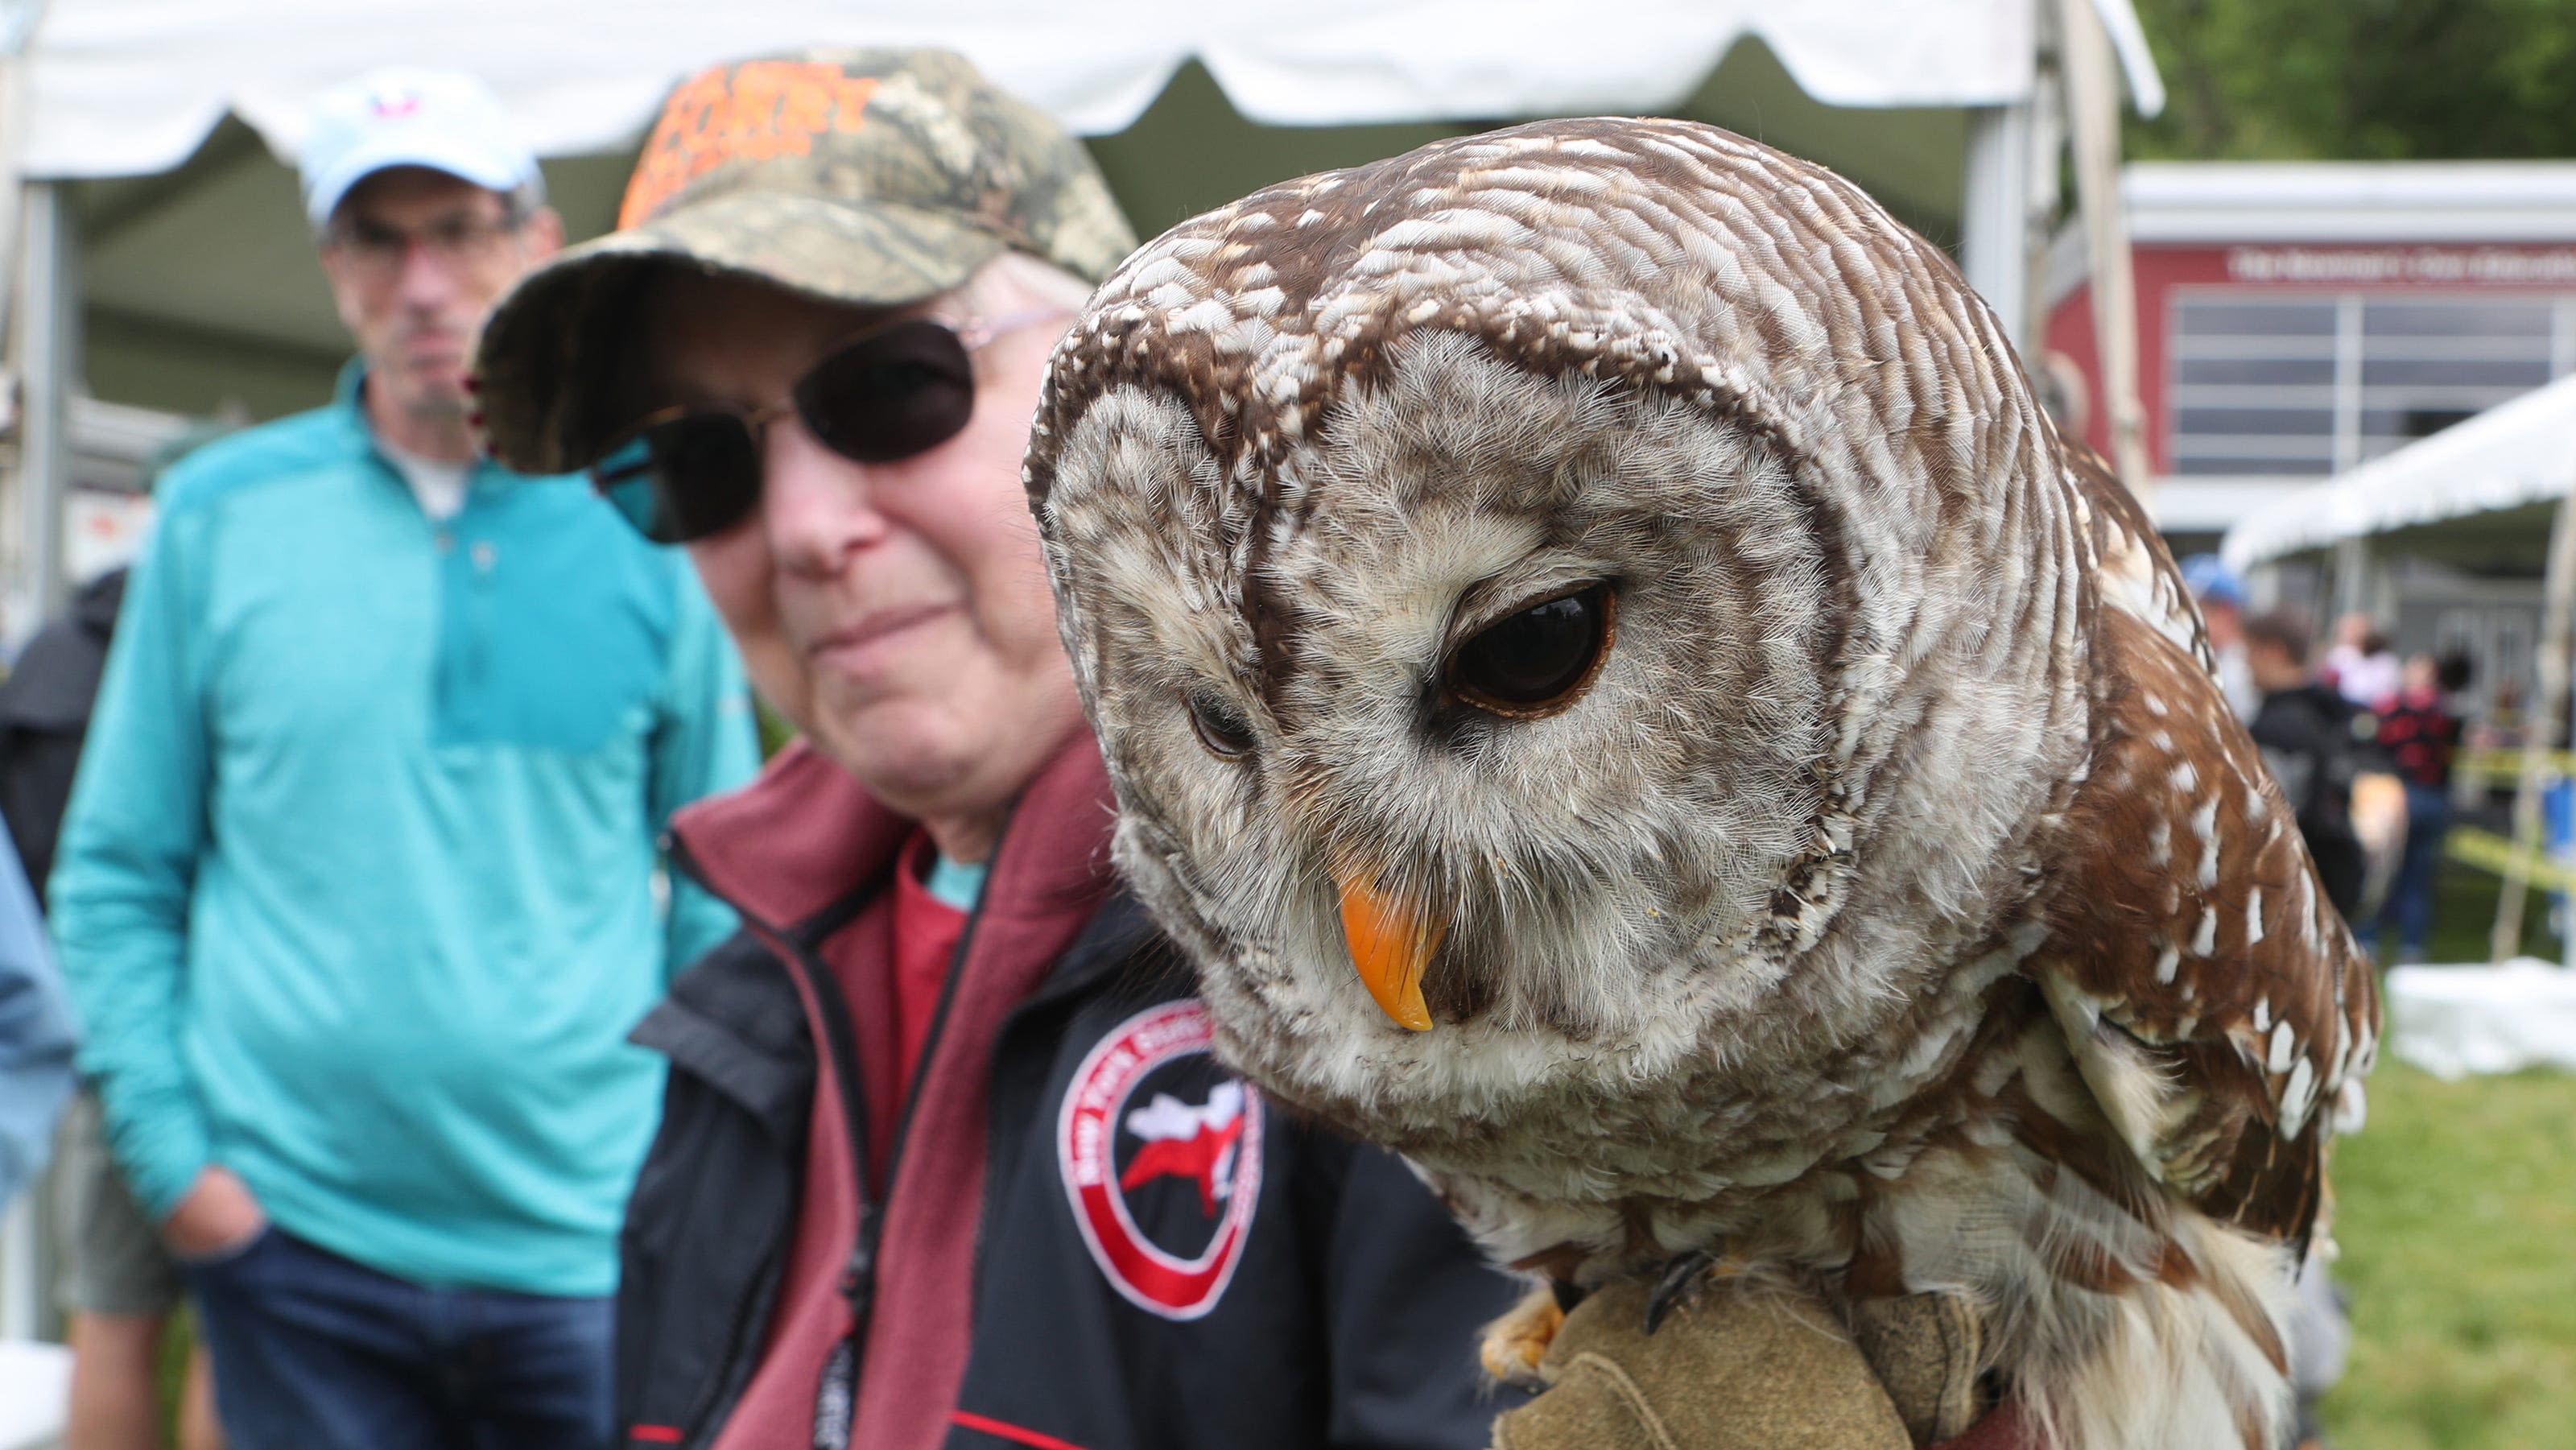 See flying demonstration, bird release at Green Chimney's Birds of Prey Day on Sunday